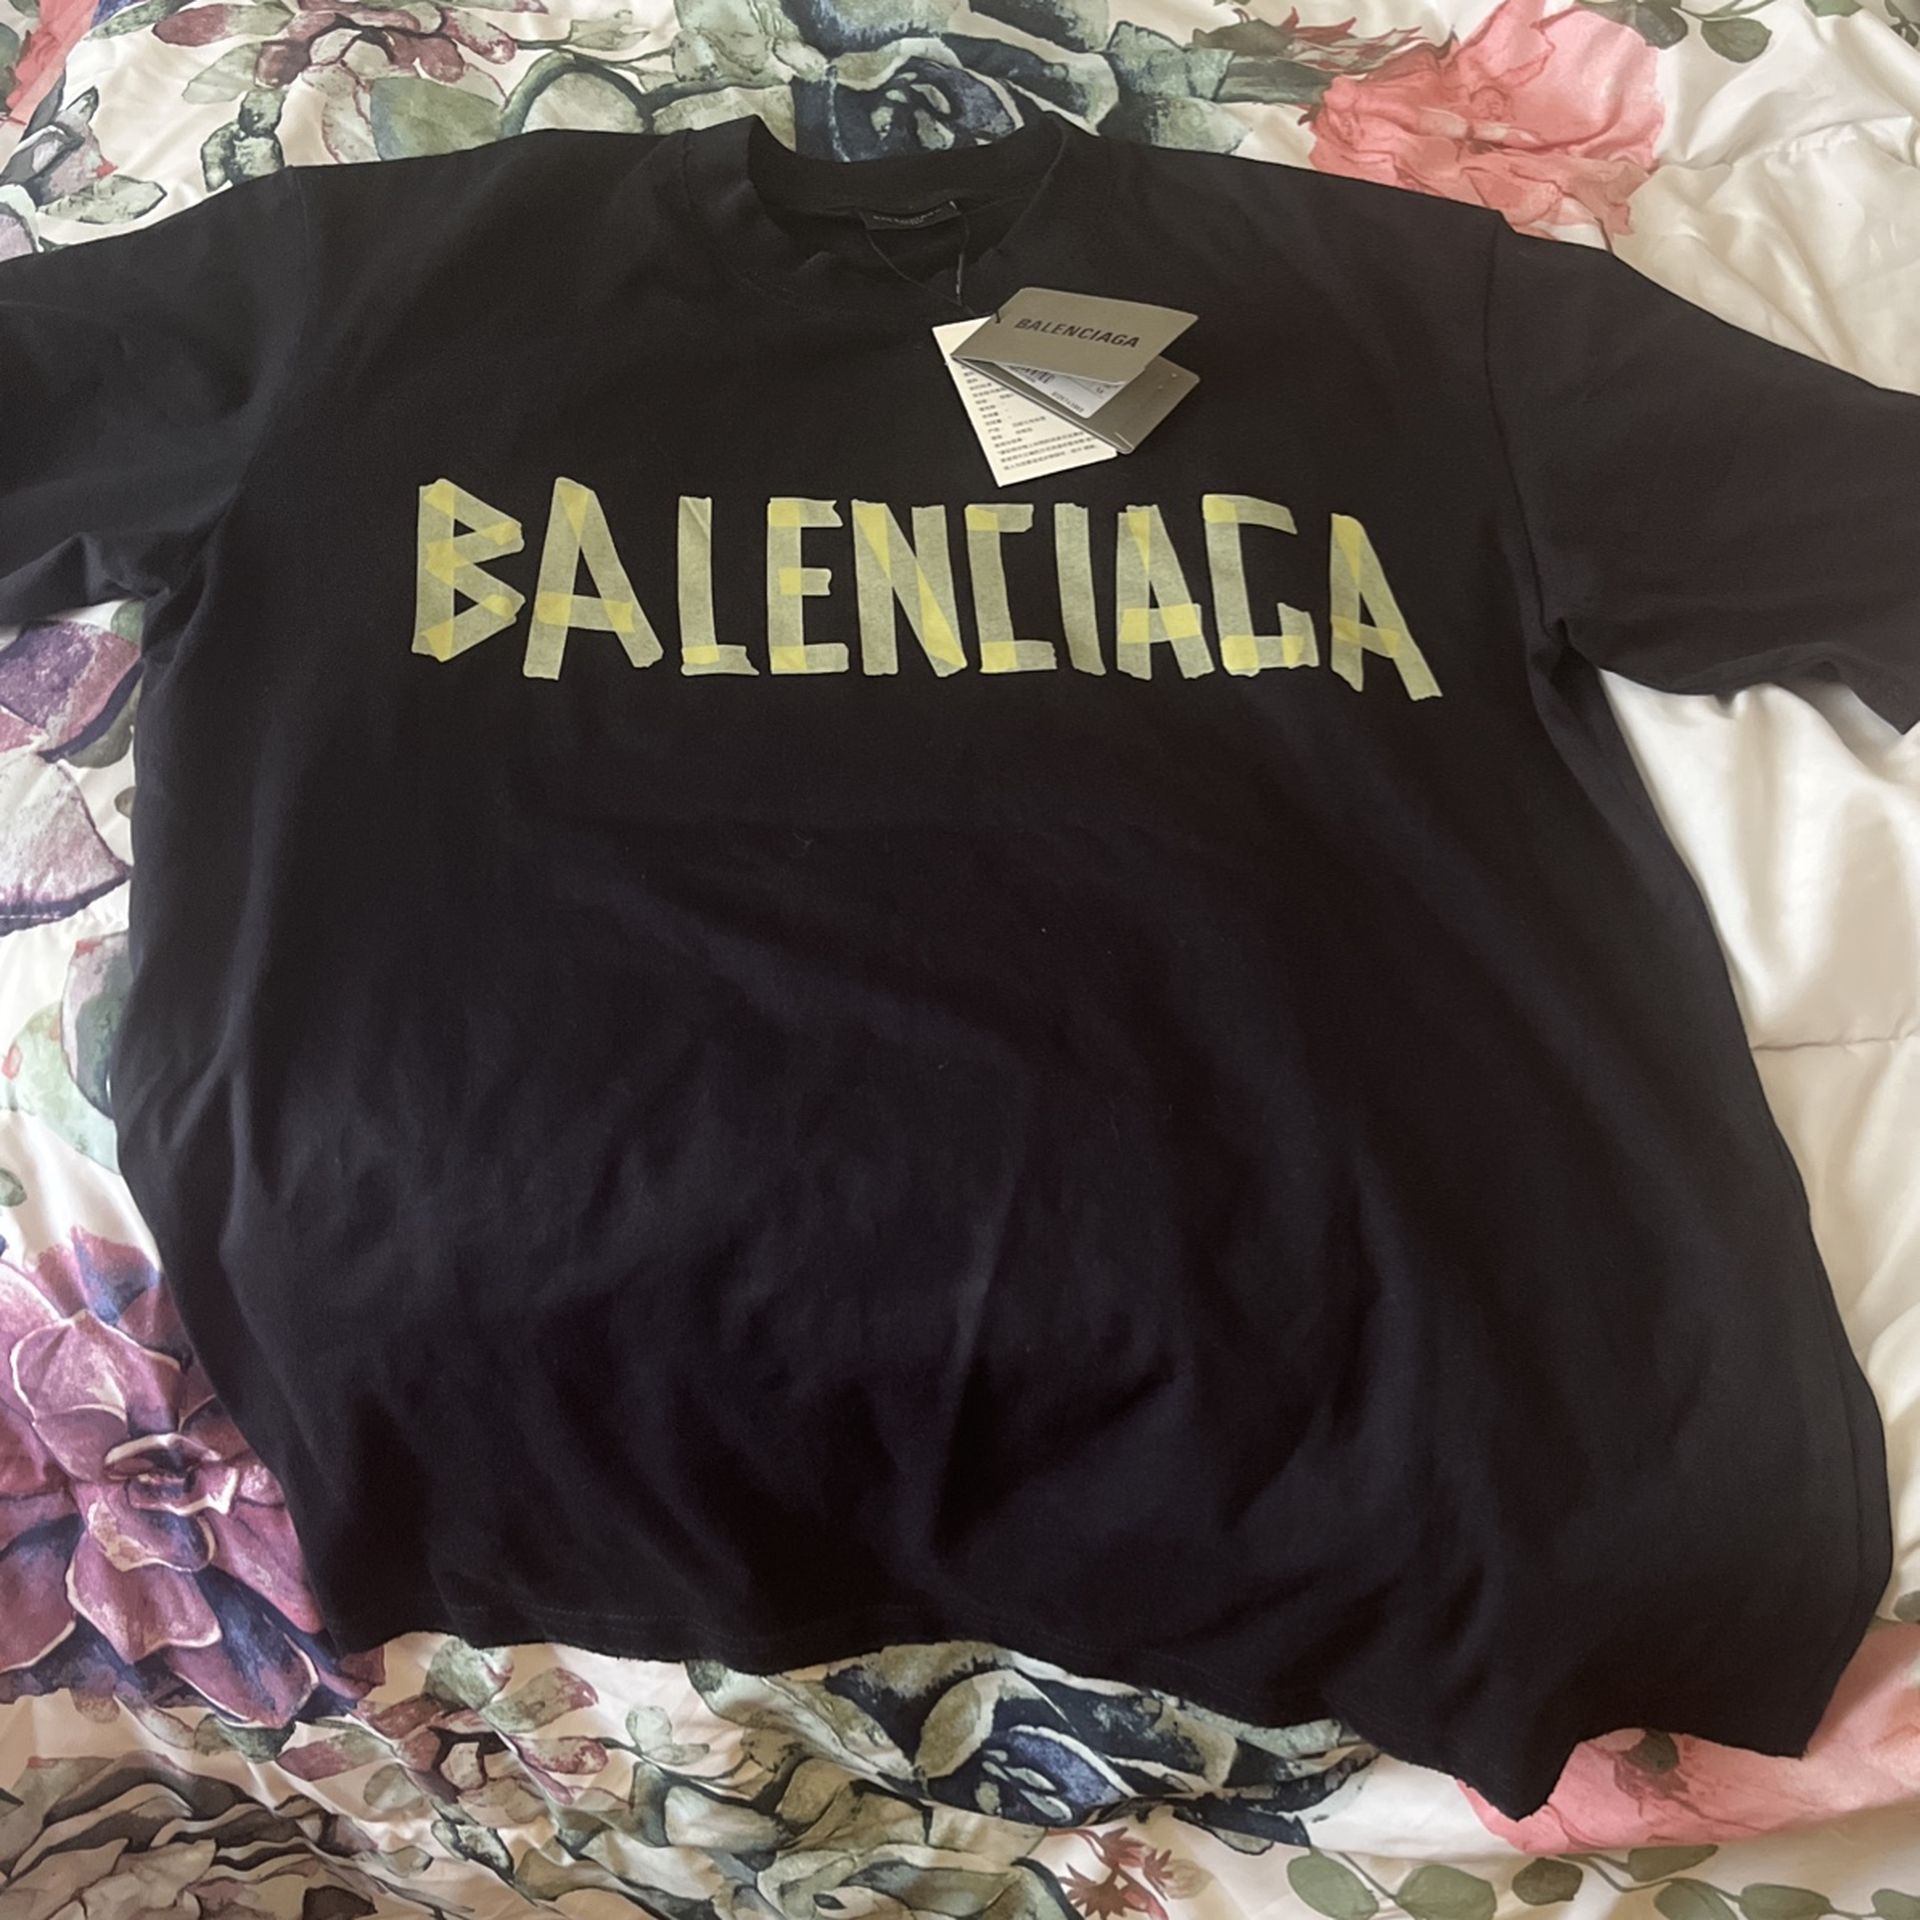 Balenciaga Shirt Brand New for Sale in PA - OfferUp